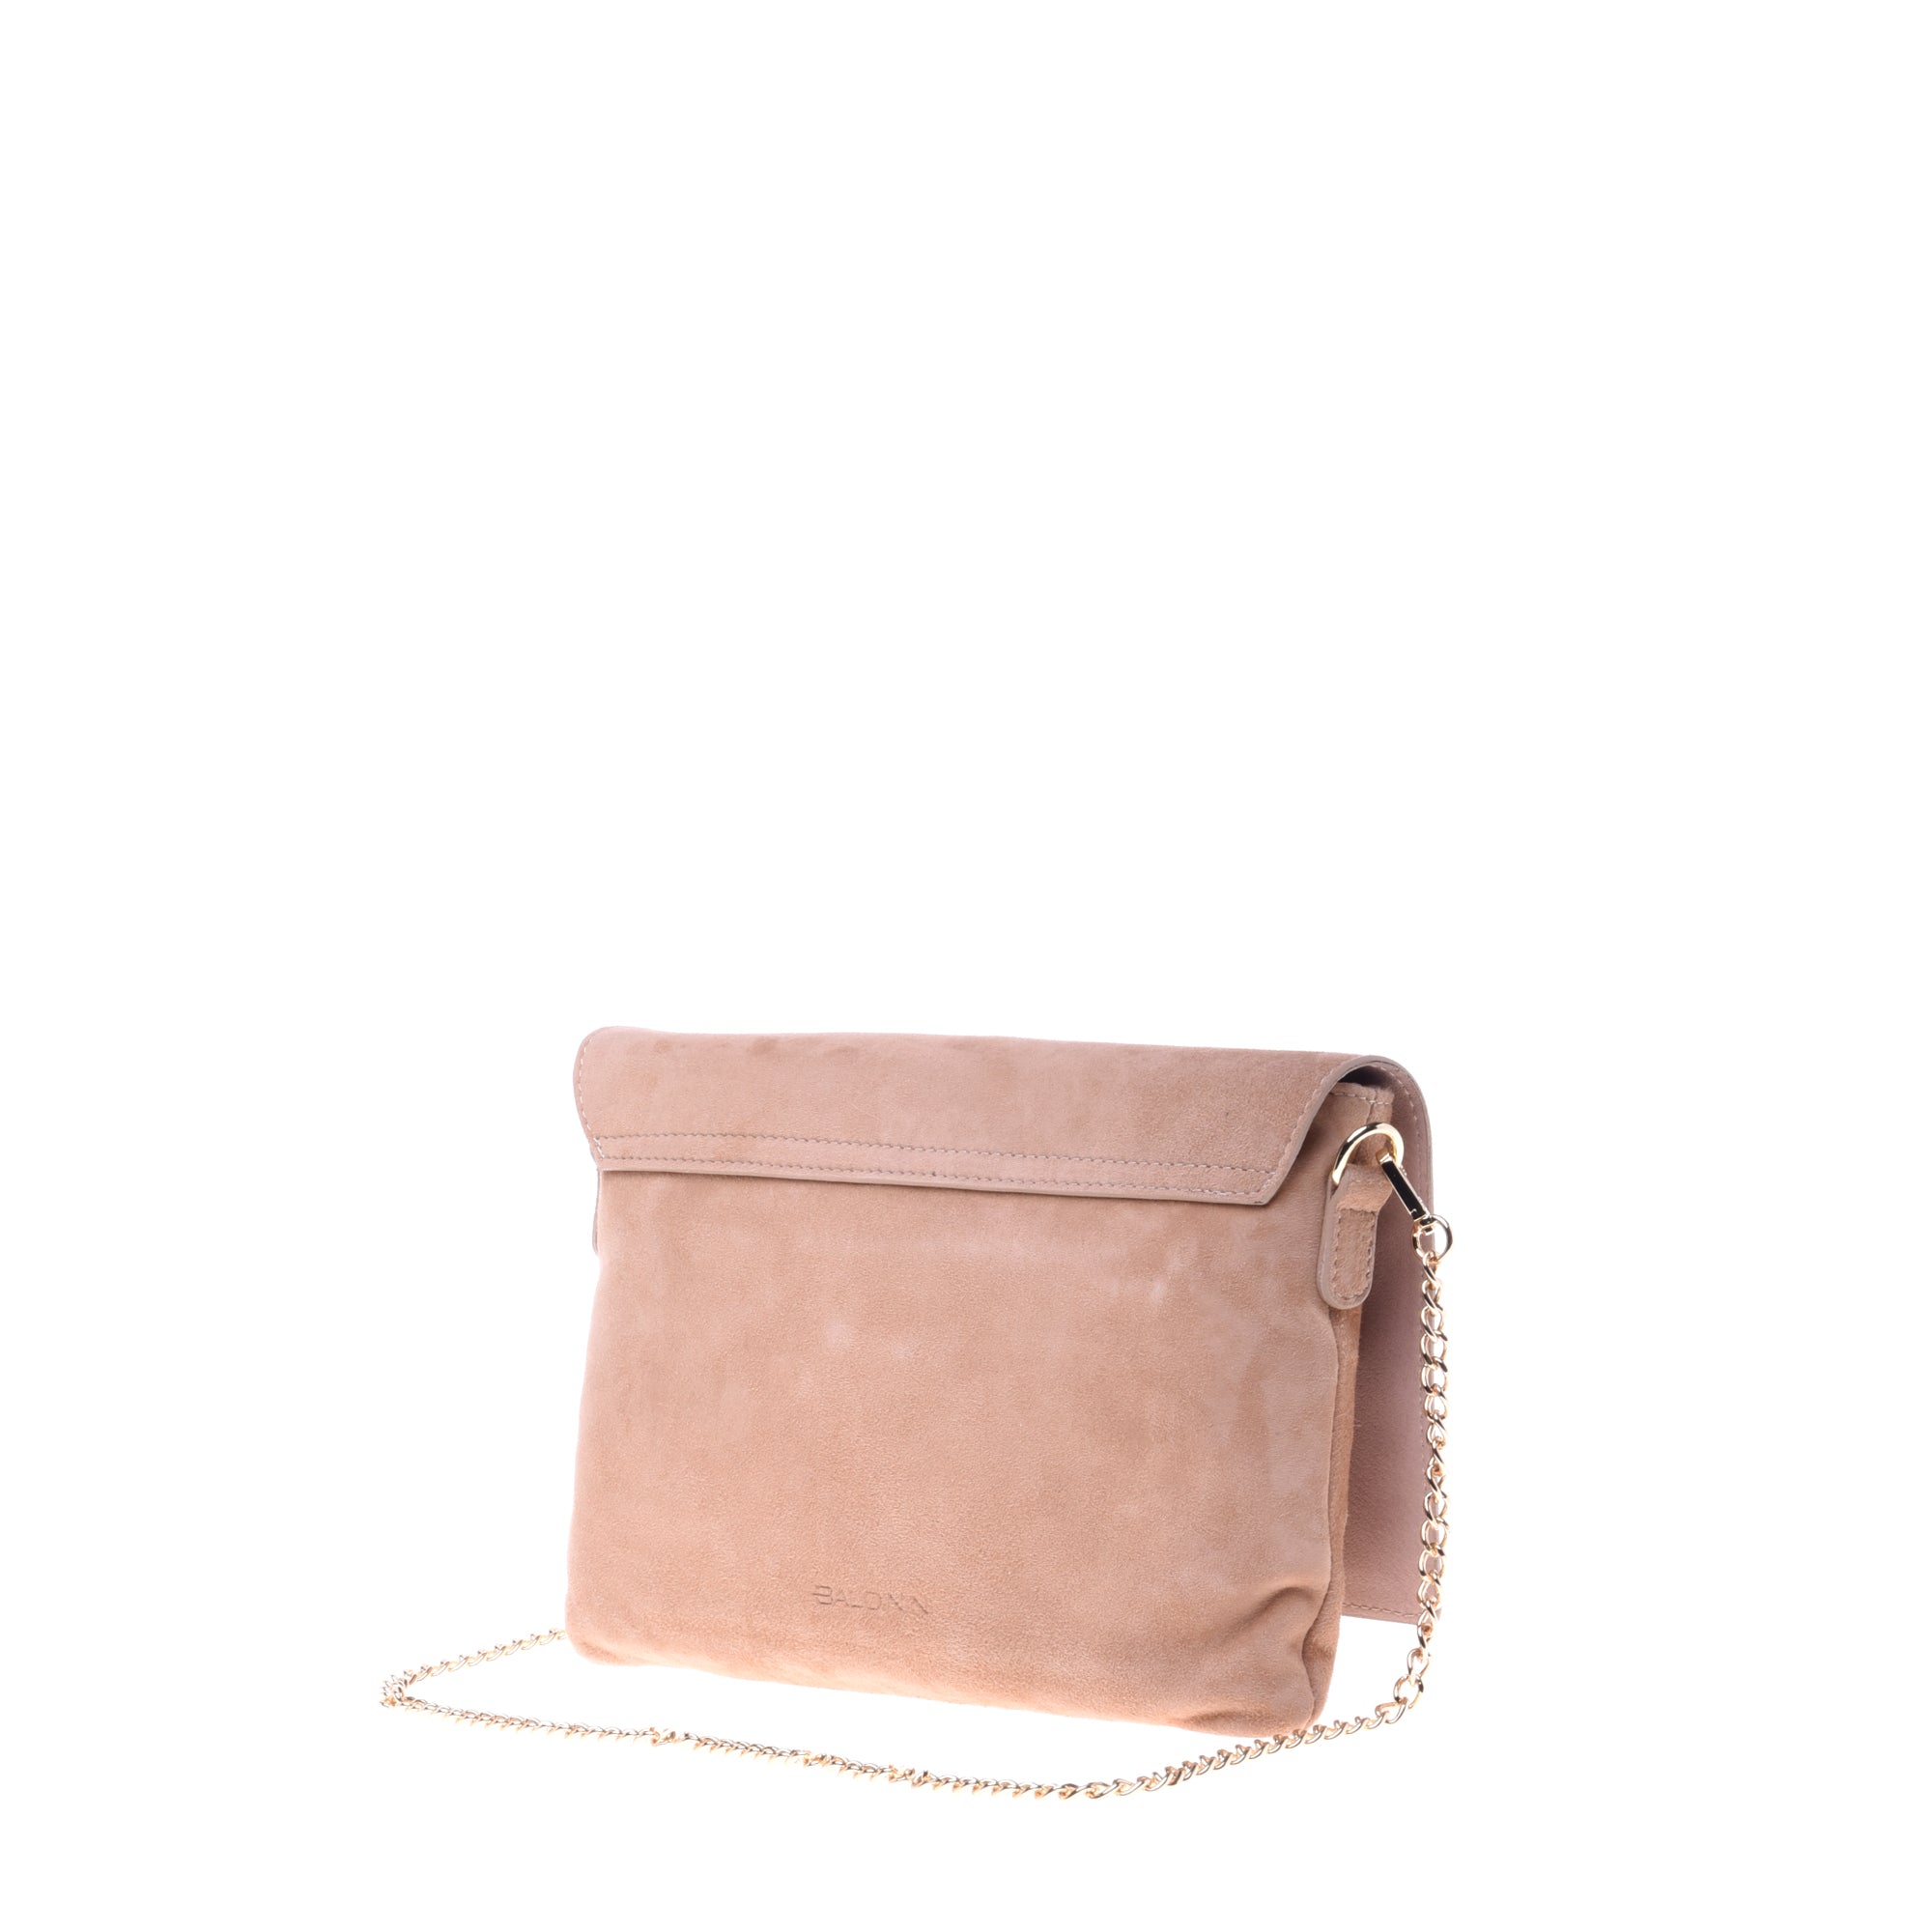 Clutch bag in taupe suede